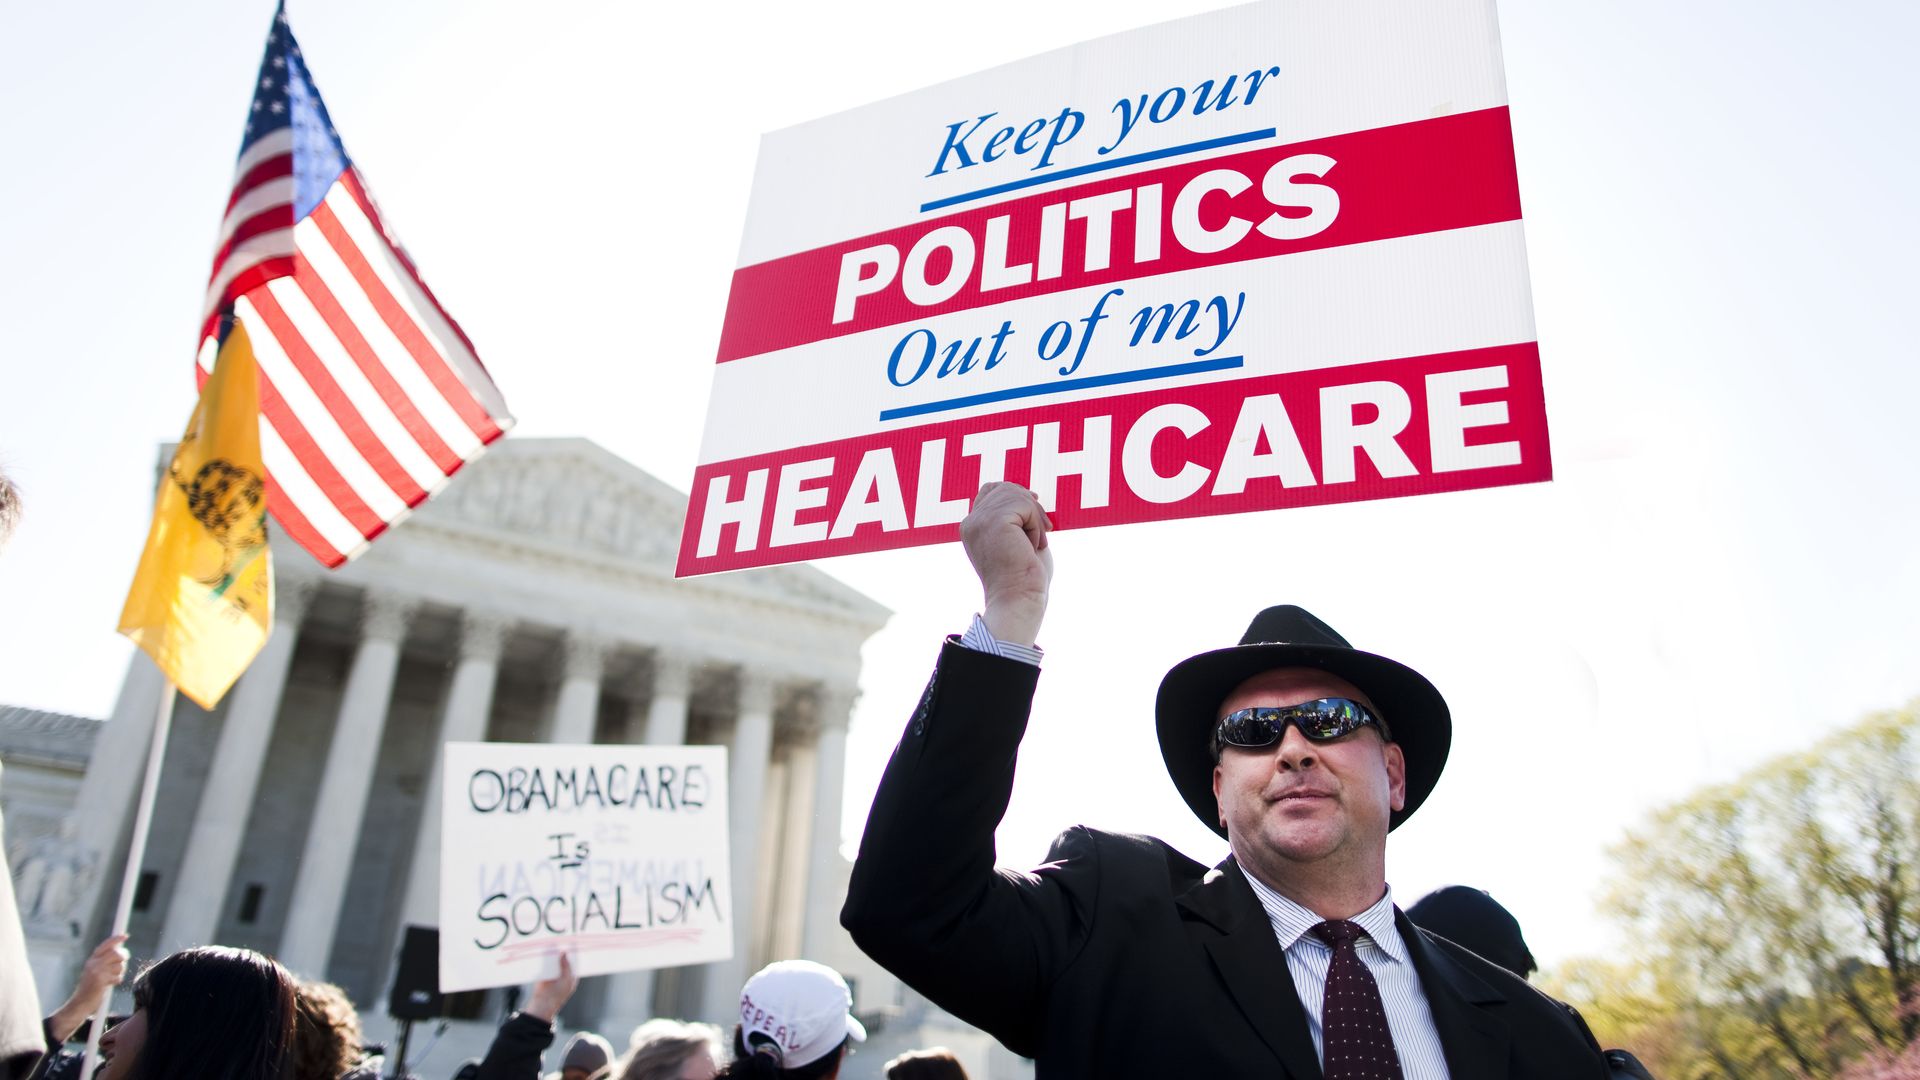 Protesters outside the Supreme Court waving signs about the ACA